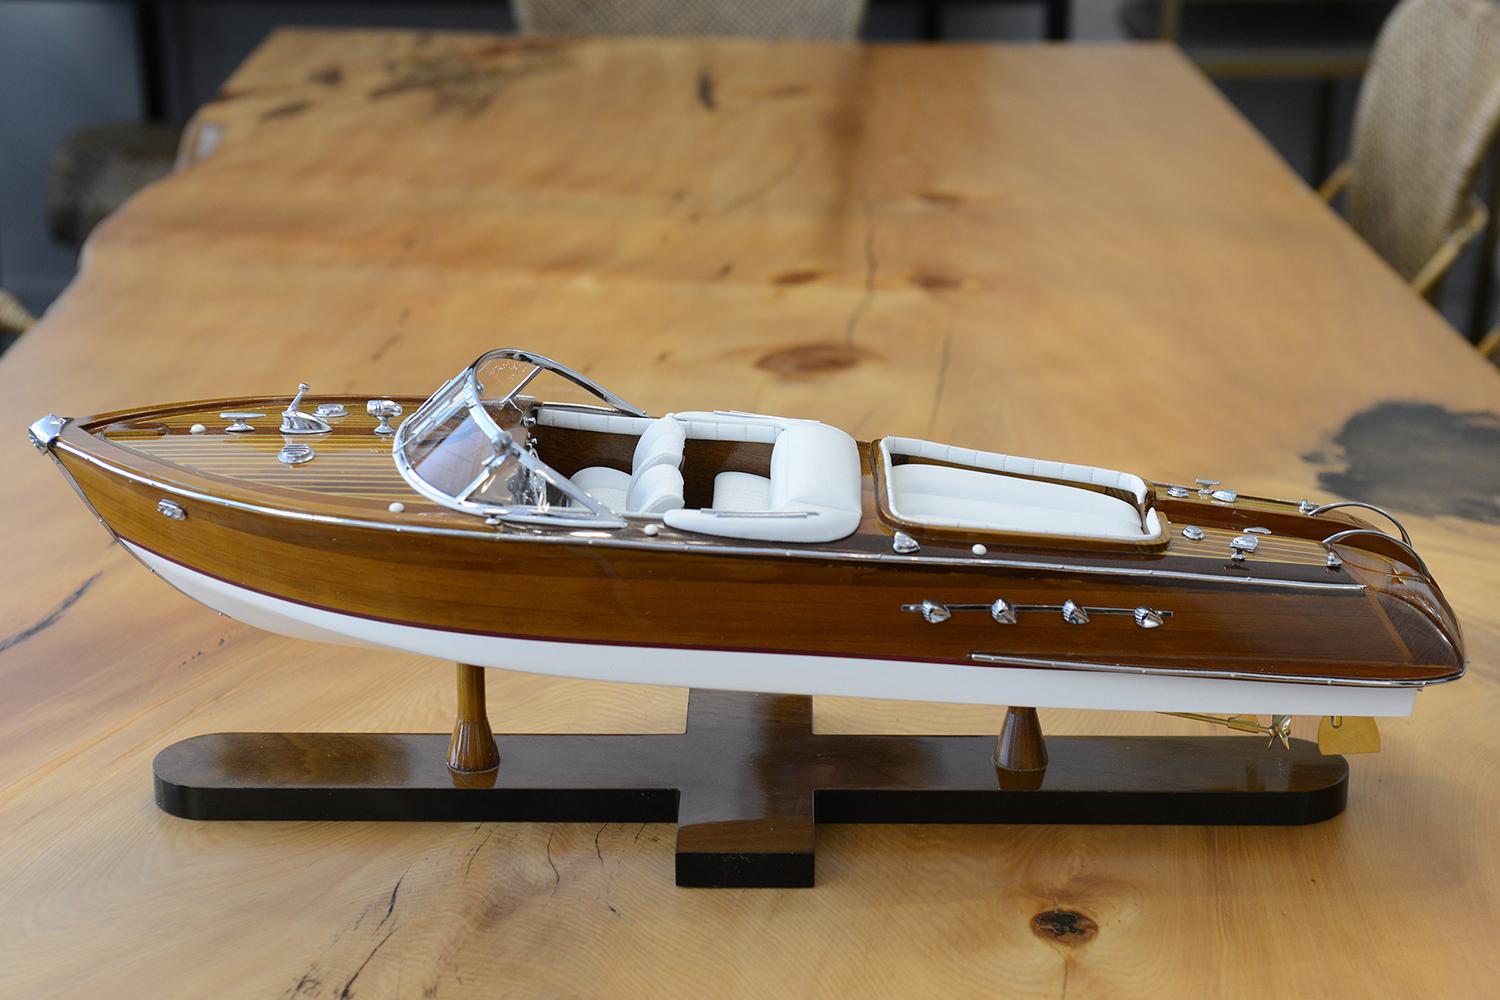 Model Riva with wooden structure in light wood
in honey brown finish.
Speed-boat modal with many hand-crafted details. 
Model on wooden base.
 